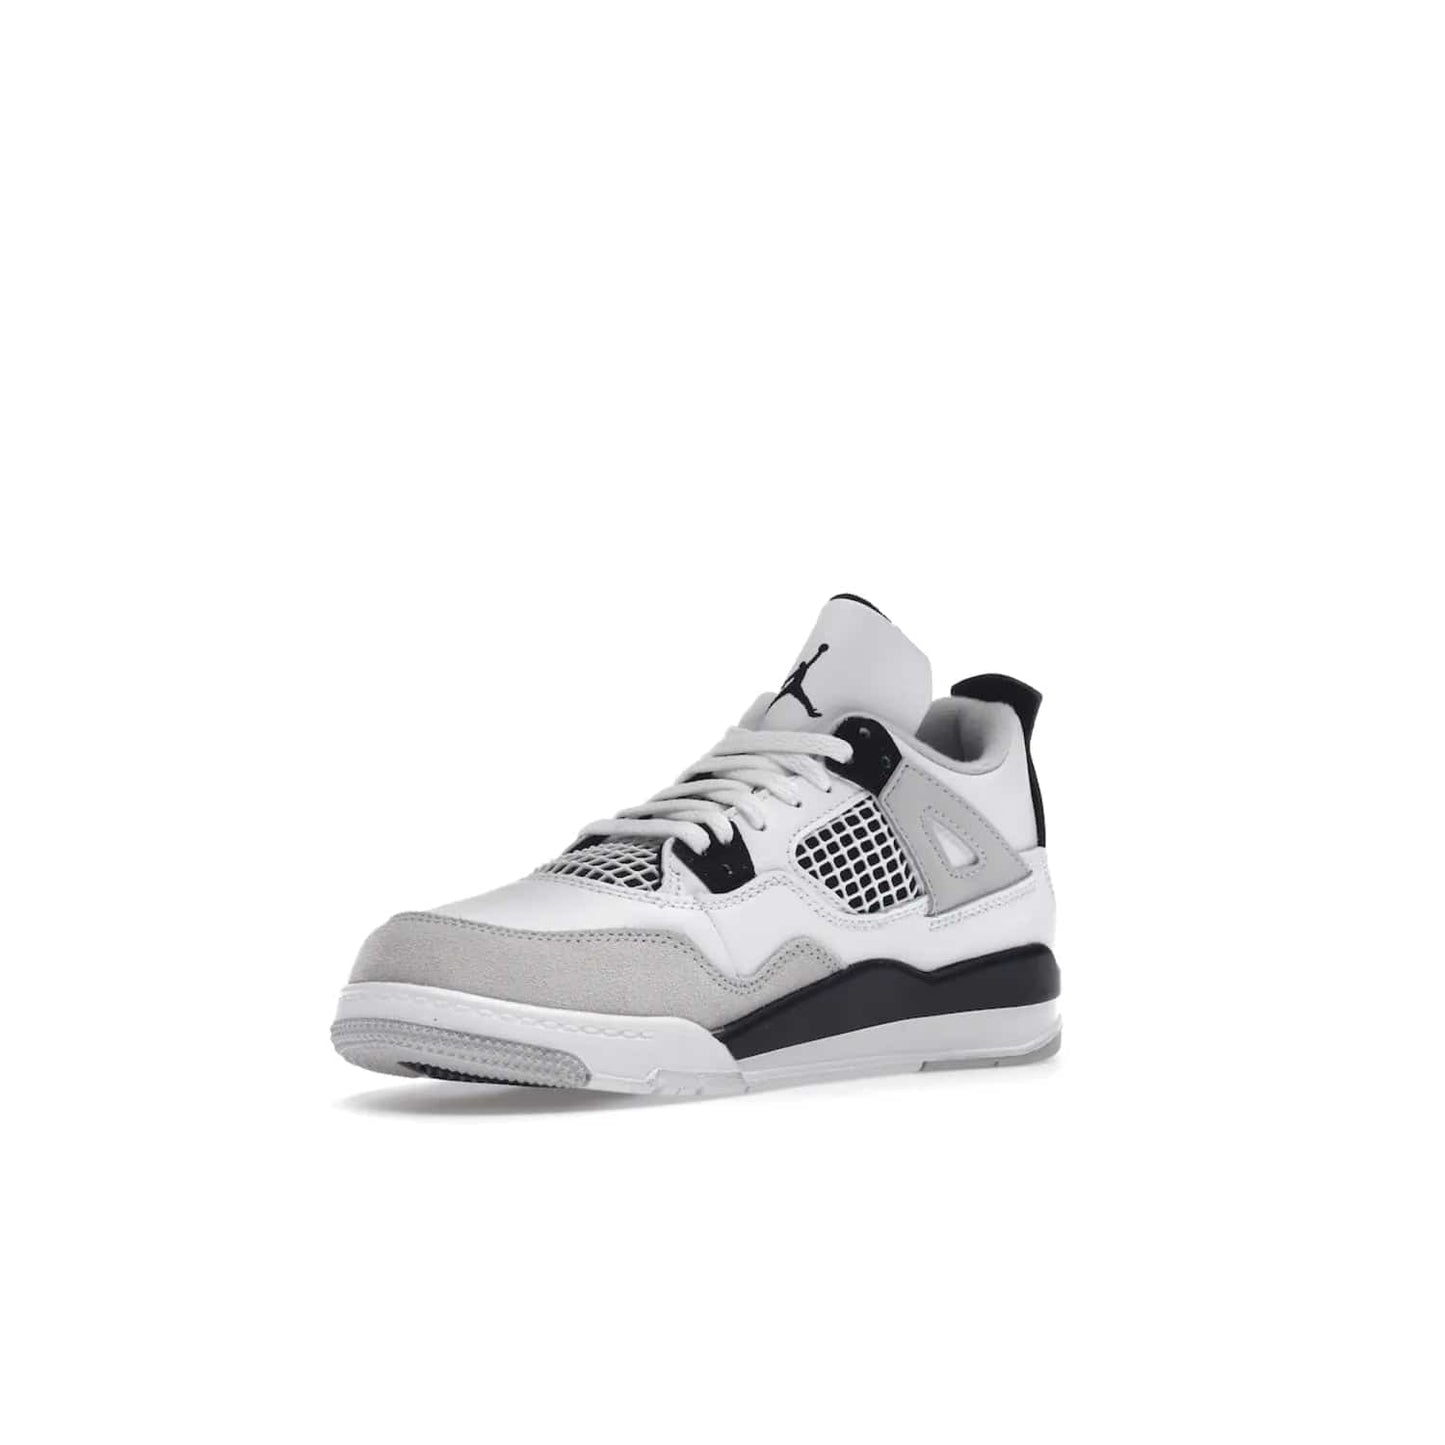 Jordan 4 Retro Military Black (PS) - Image 15 - Only at www.BallersClubKickz.com - Iconic Air Jordan 4 Retro Military Black PS with classic White, Black and Neutral Grey color palette. Mesh panels, adjustable lacing and rubber outsole. Releasing on 21st May 2022 - must-have for any sneaker collection.